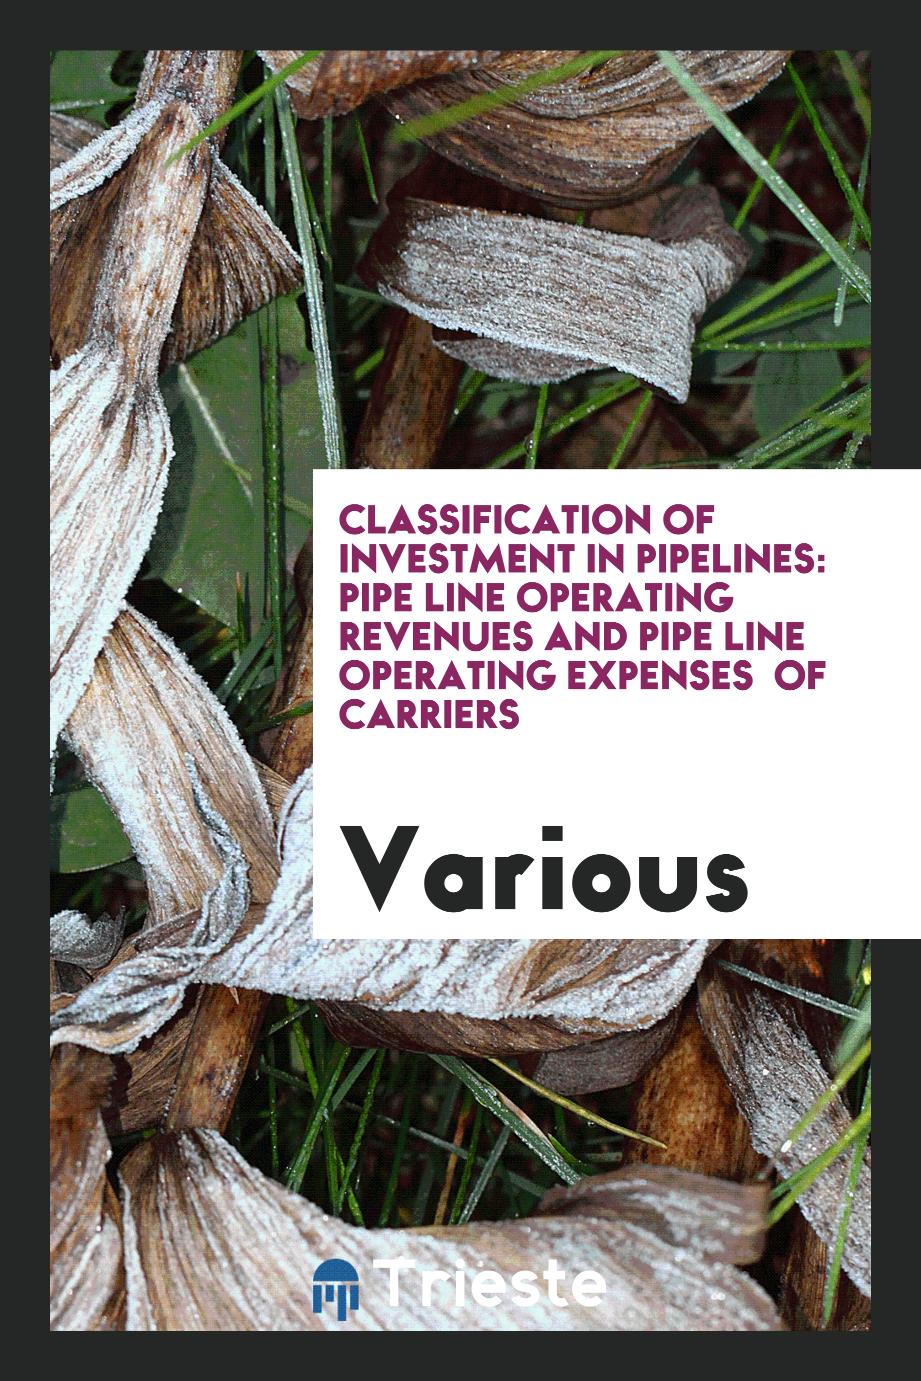 Classification of Investment in Pipelines: Pipe Line Operating Revenues and Pipe line operating expenses of carriers